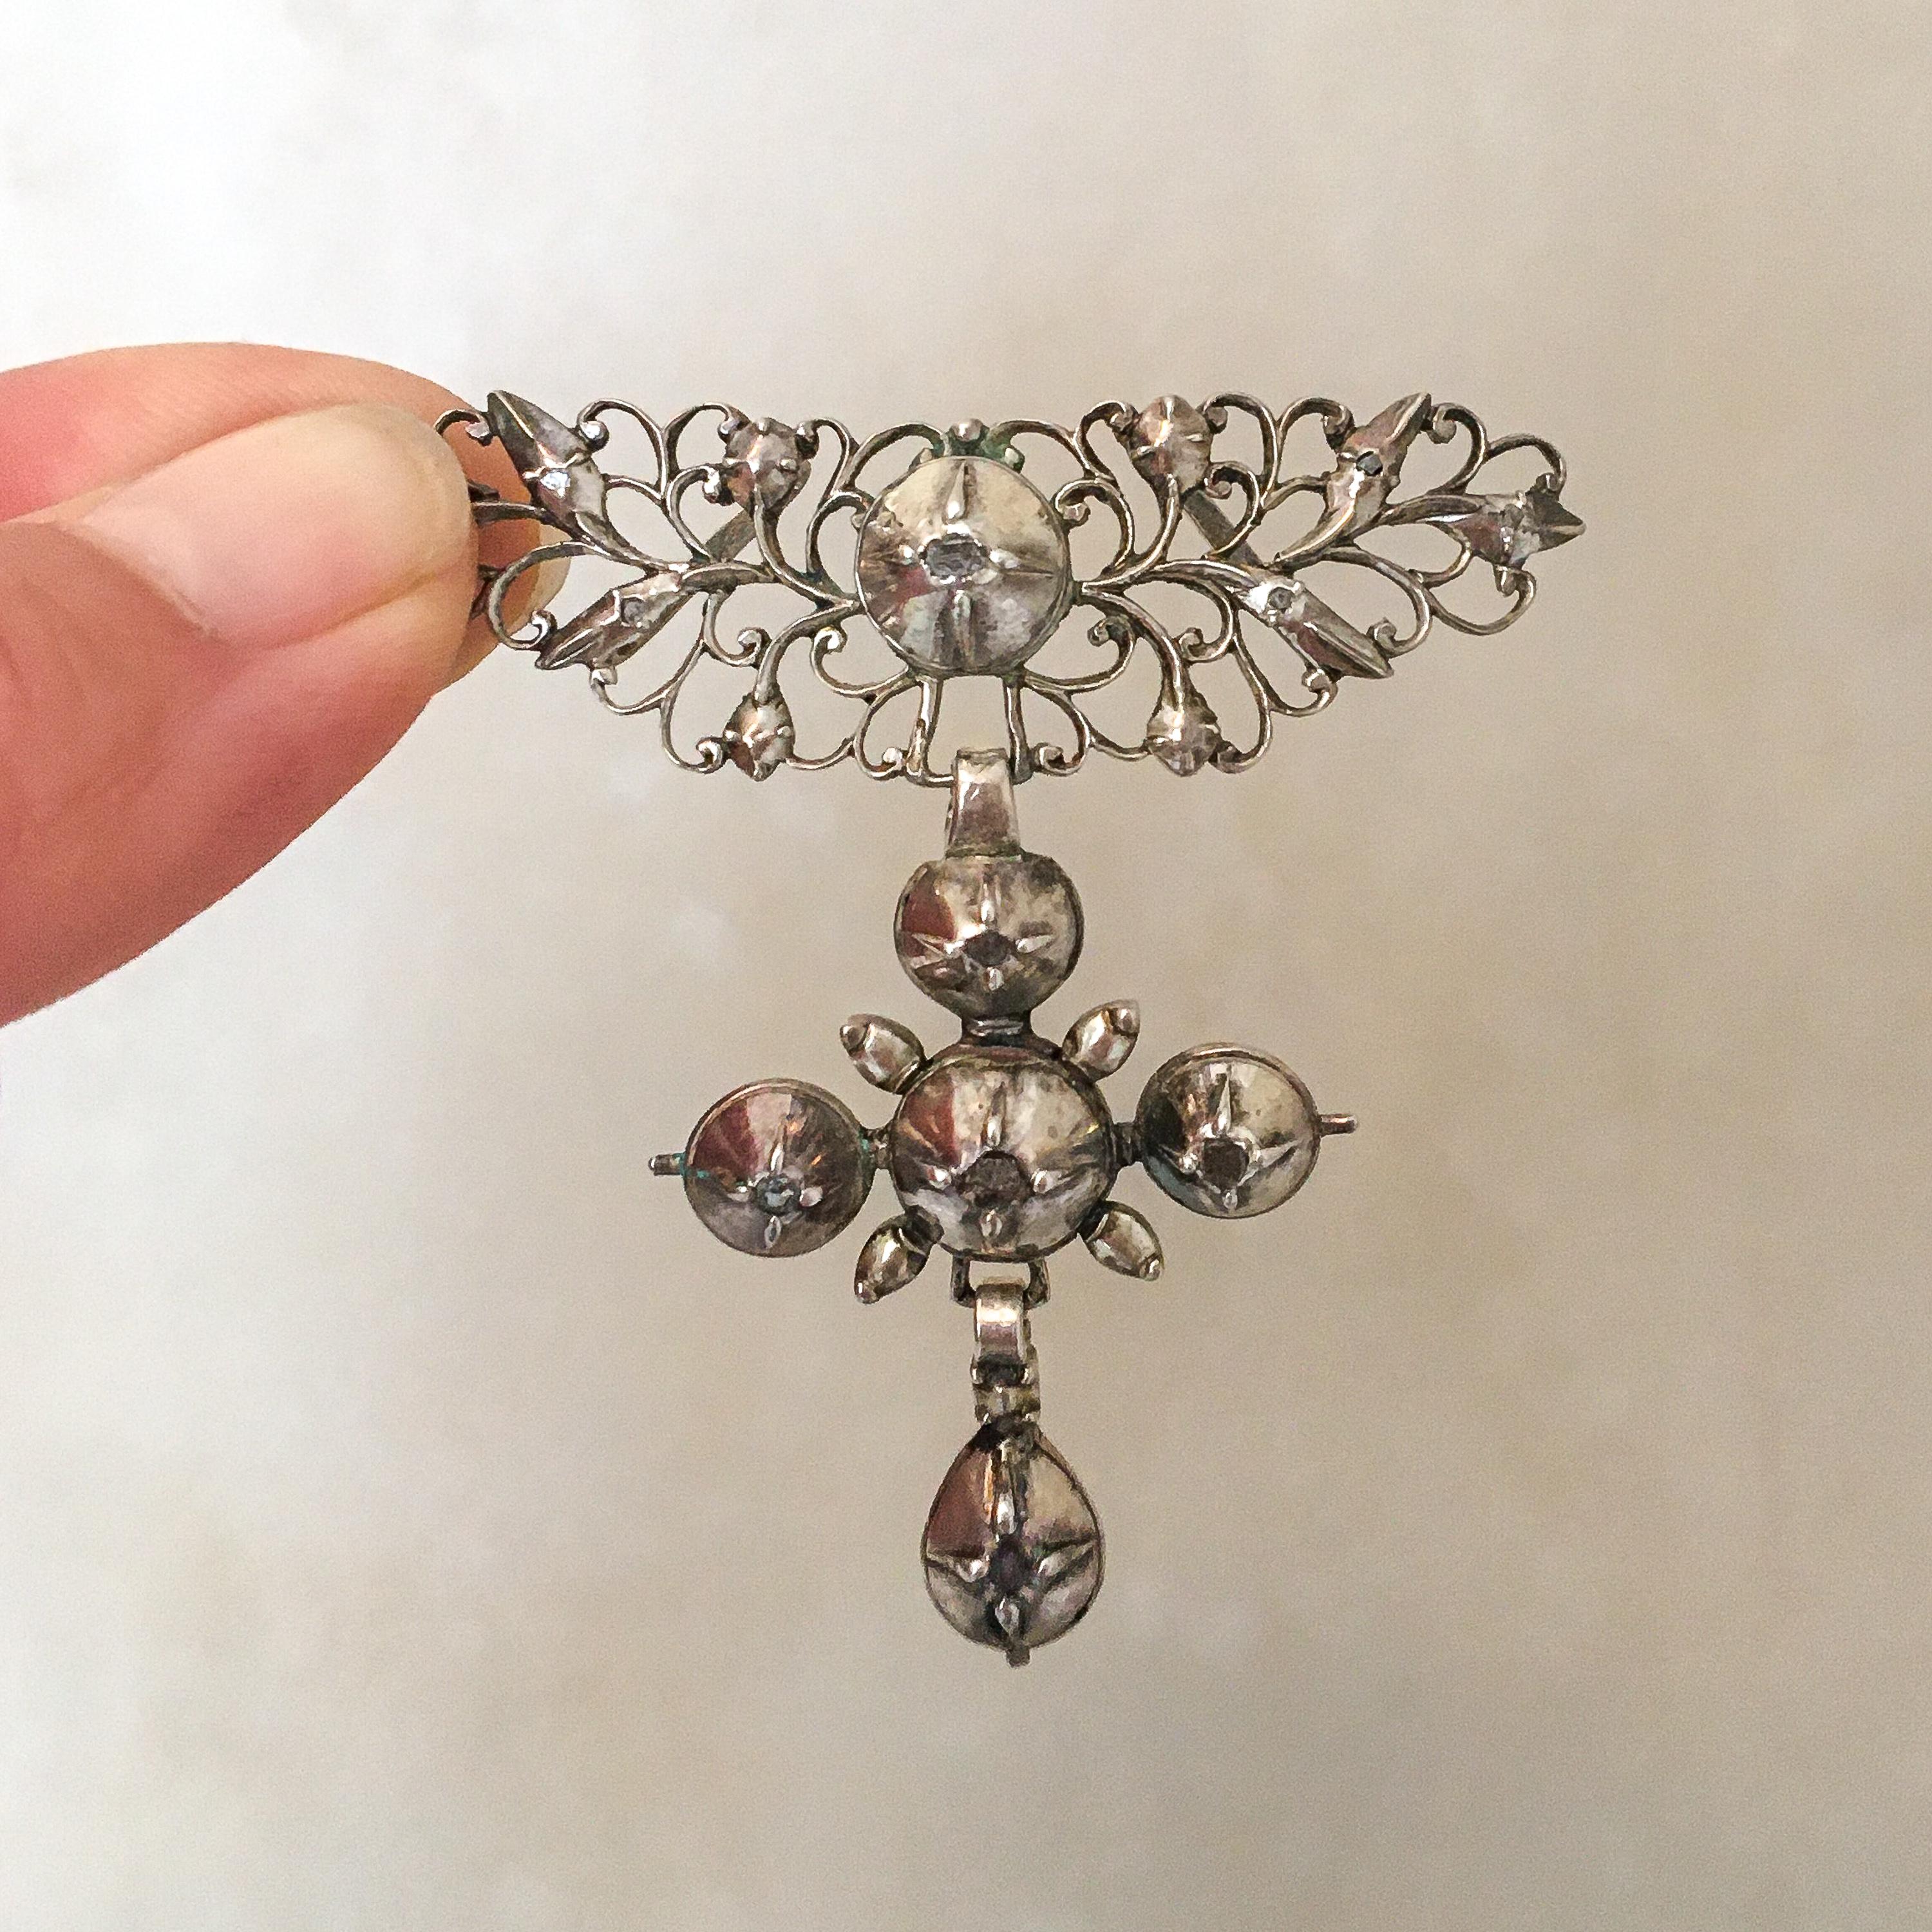 This is an antique early 19th century silver triple drop panel filigree cross pendant. The three graduated silver panels of open scrollwork are set with rose-cut diamonds in dome-shaped frames. Below the upper panel of the pendant you can see the